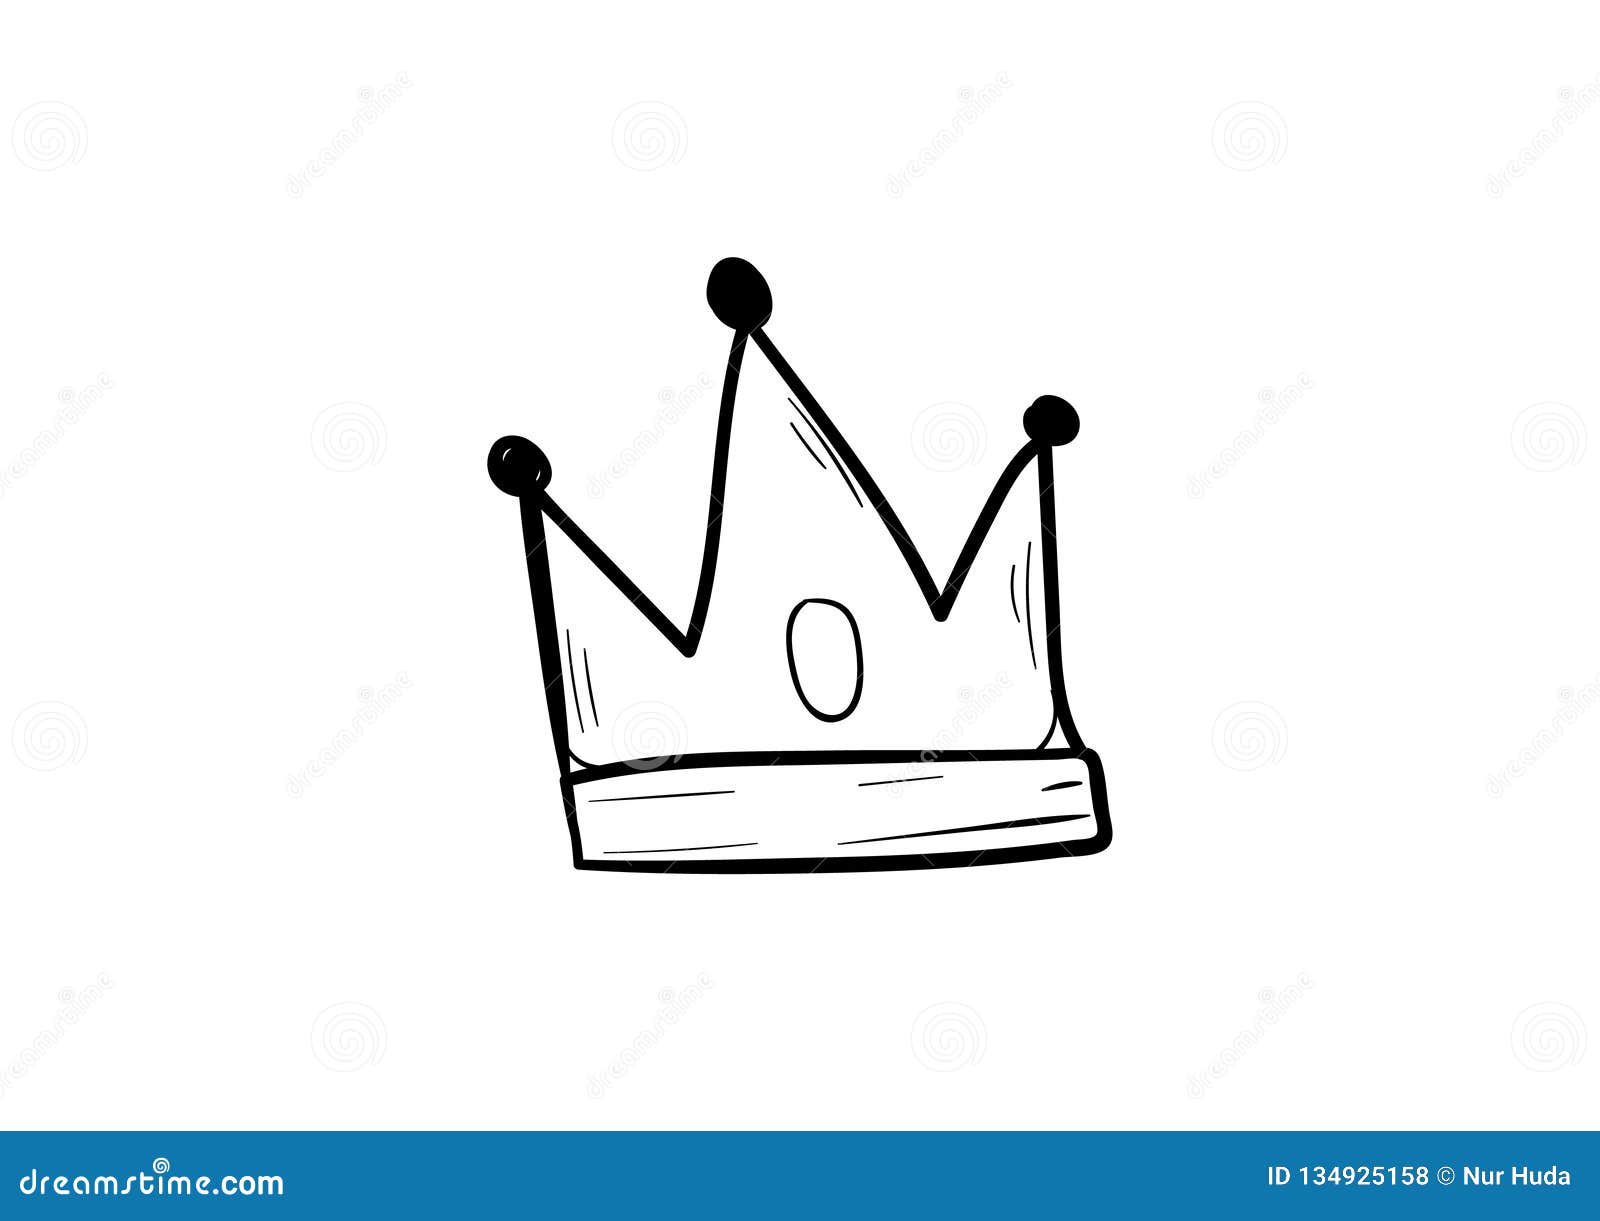 Crown Doodle a Hand Drawn Vector Doodle Illustration of a Shiny Crown ...